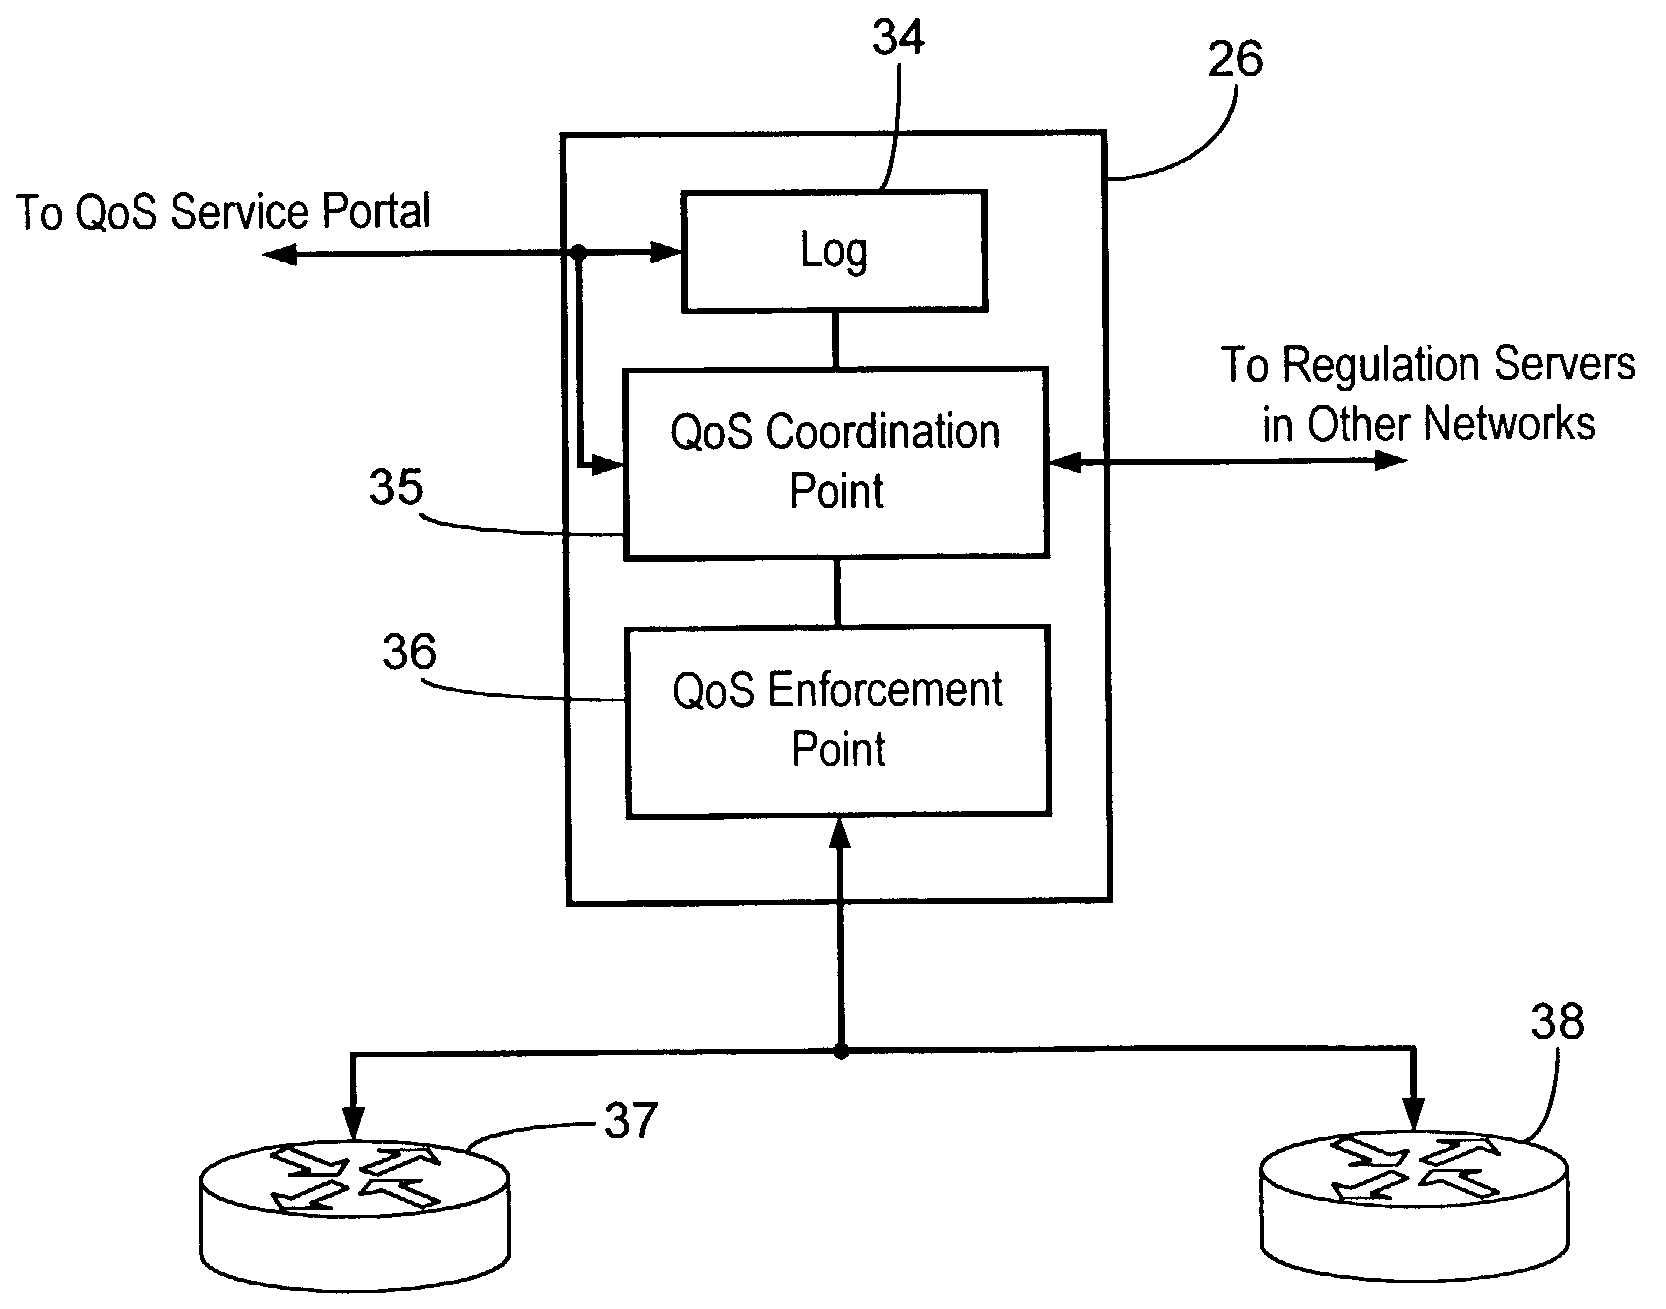 Internetwork quality of service provisioning with reciprocal compensation